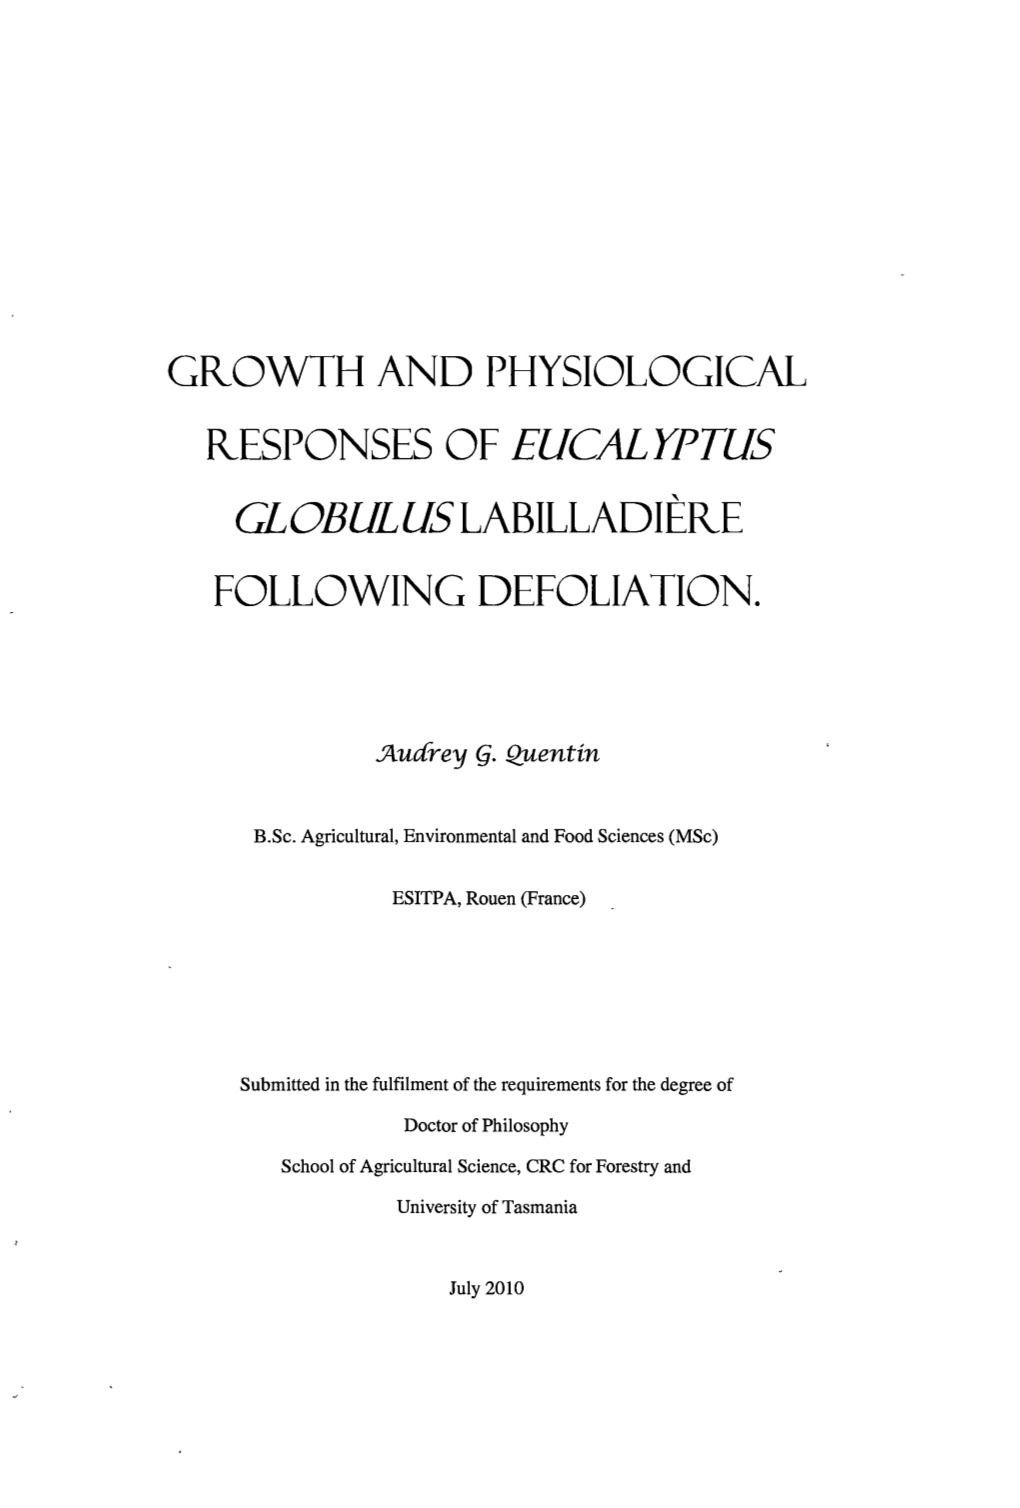 Growth and Physiological Responses of Eucalyptus Globulus